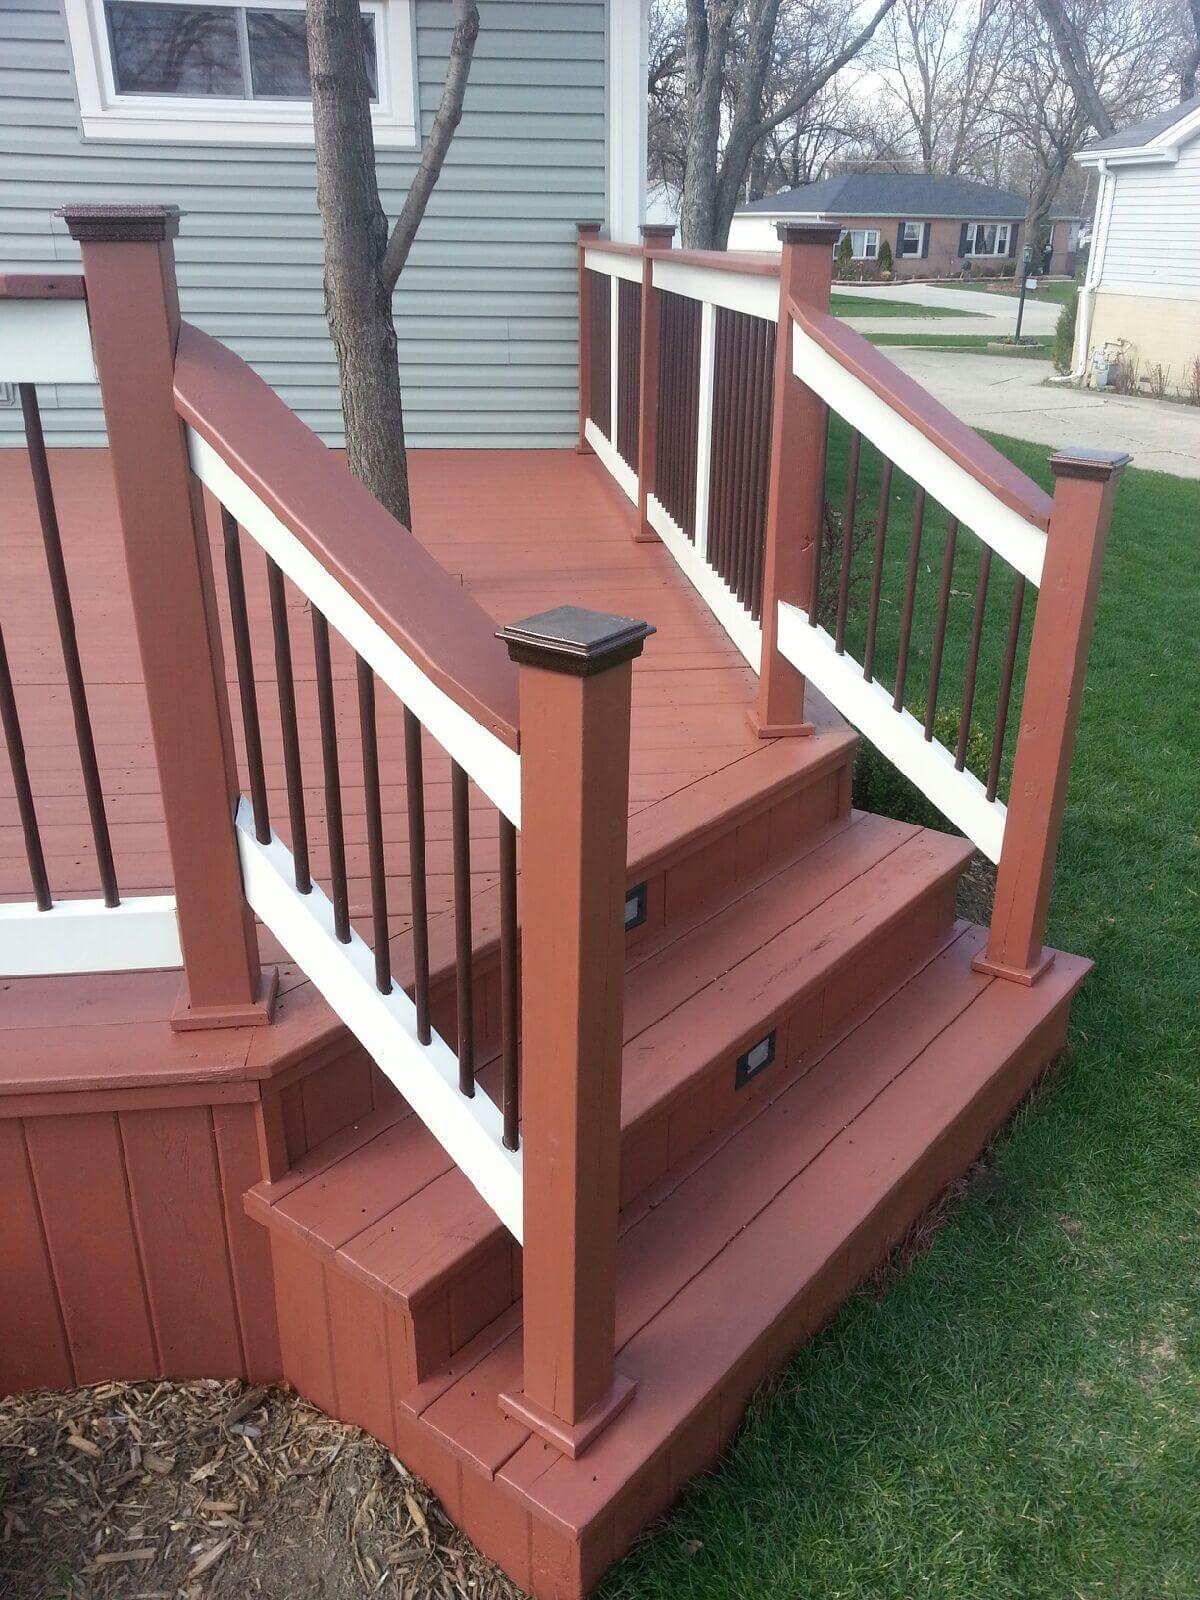 Repairs and maintenance for your deck, fence, and exterior wood staining. - Deck Staining Clarendon Hills - Deck Cleaning Services